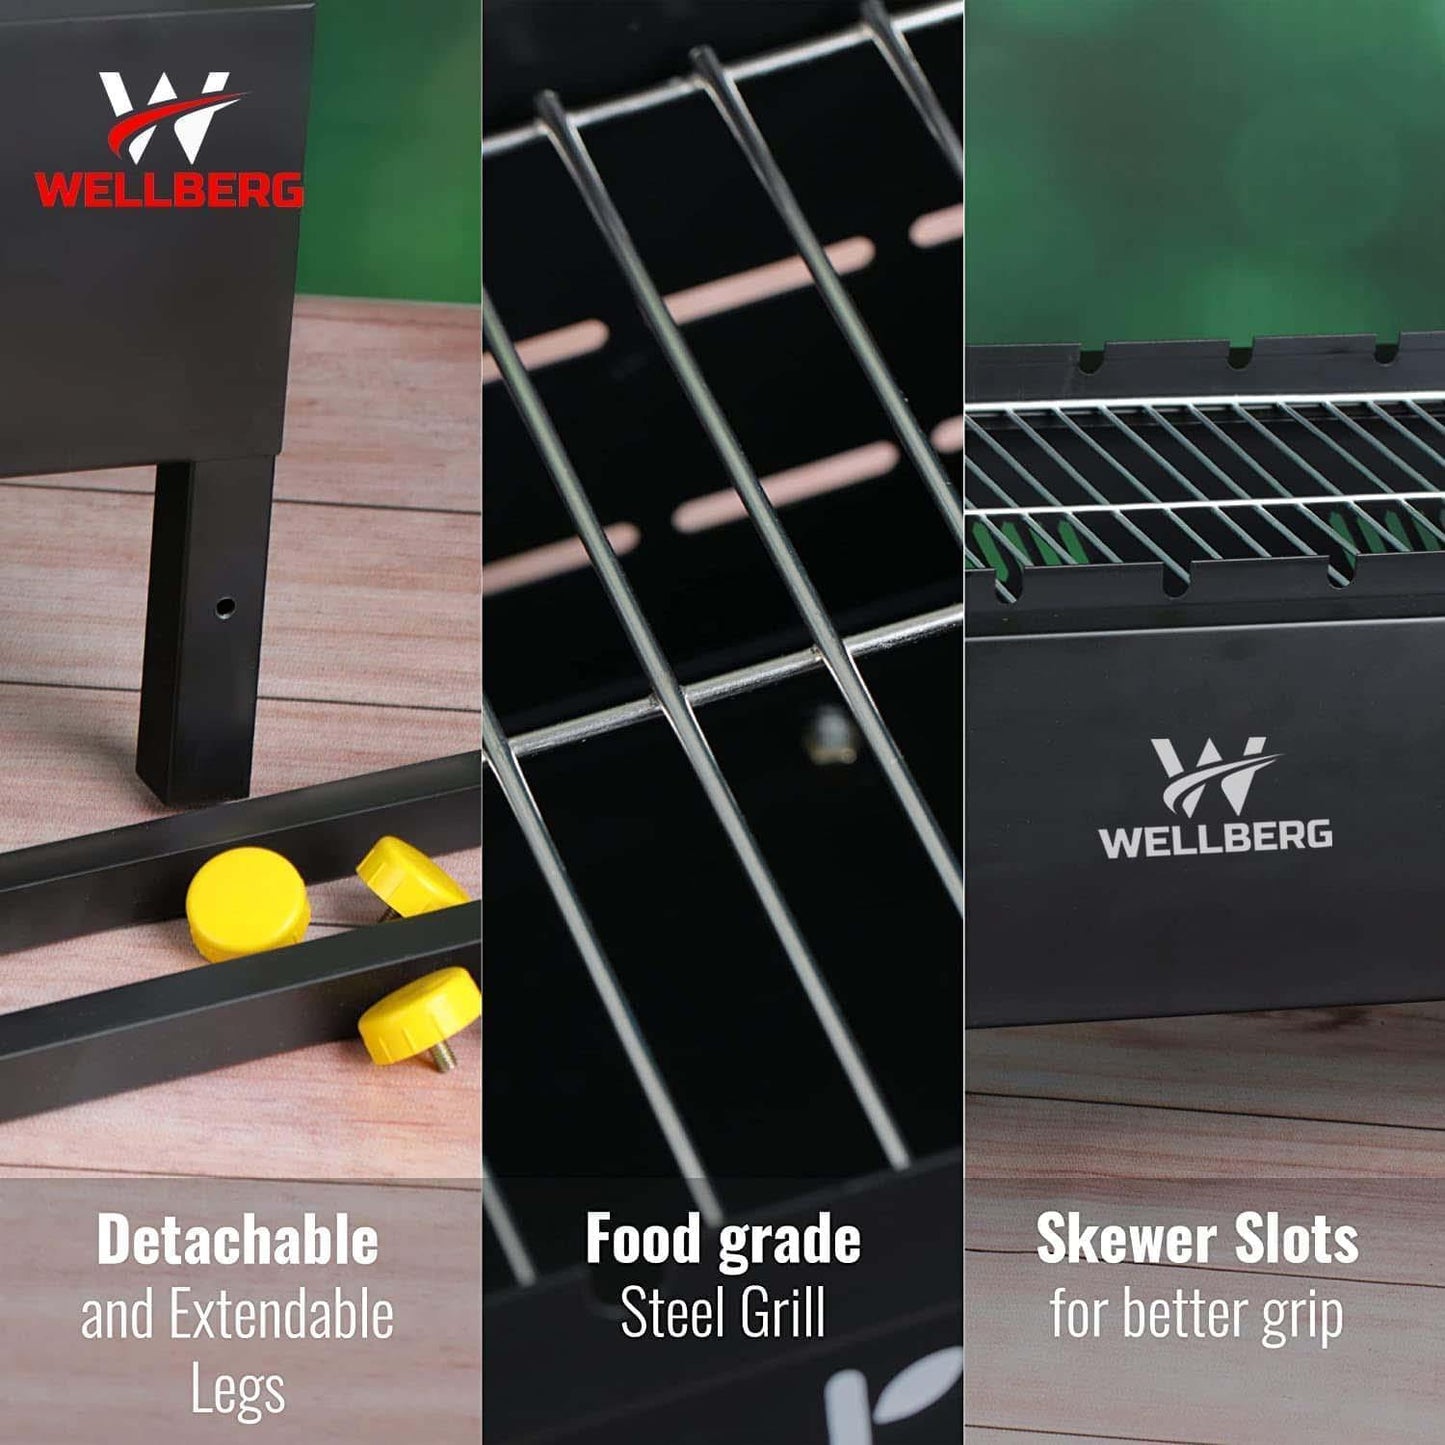 Wellberg Premium XL Charcoal Barbeque Grill With 8 Skewers - WELLBERG